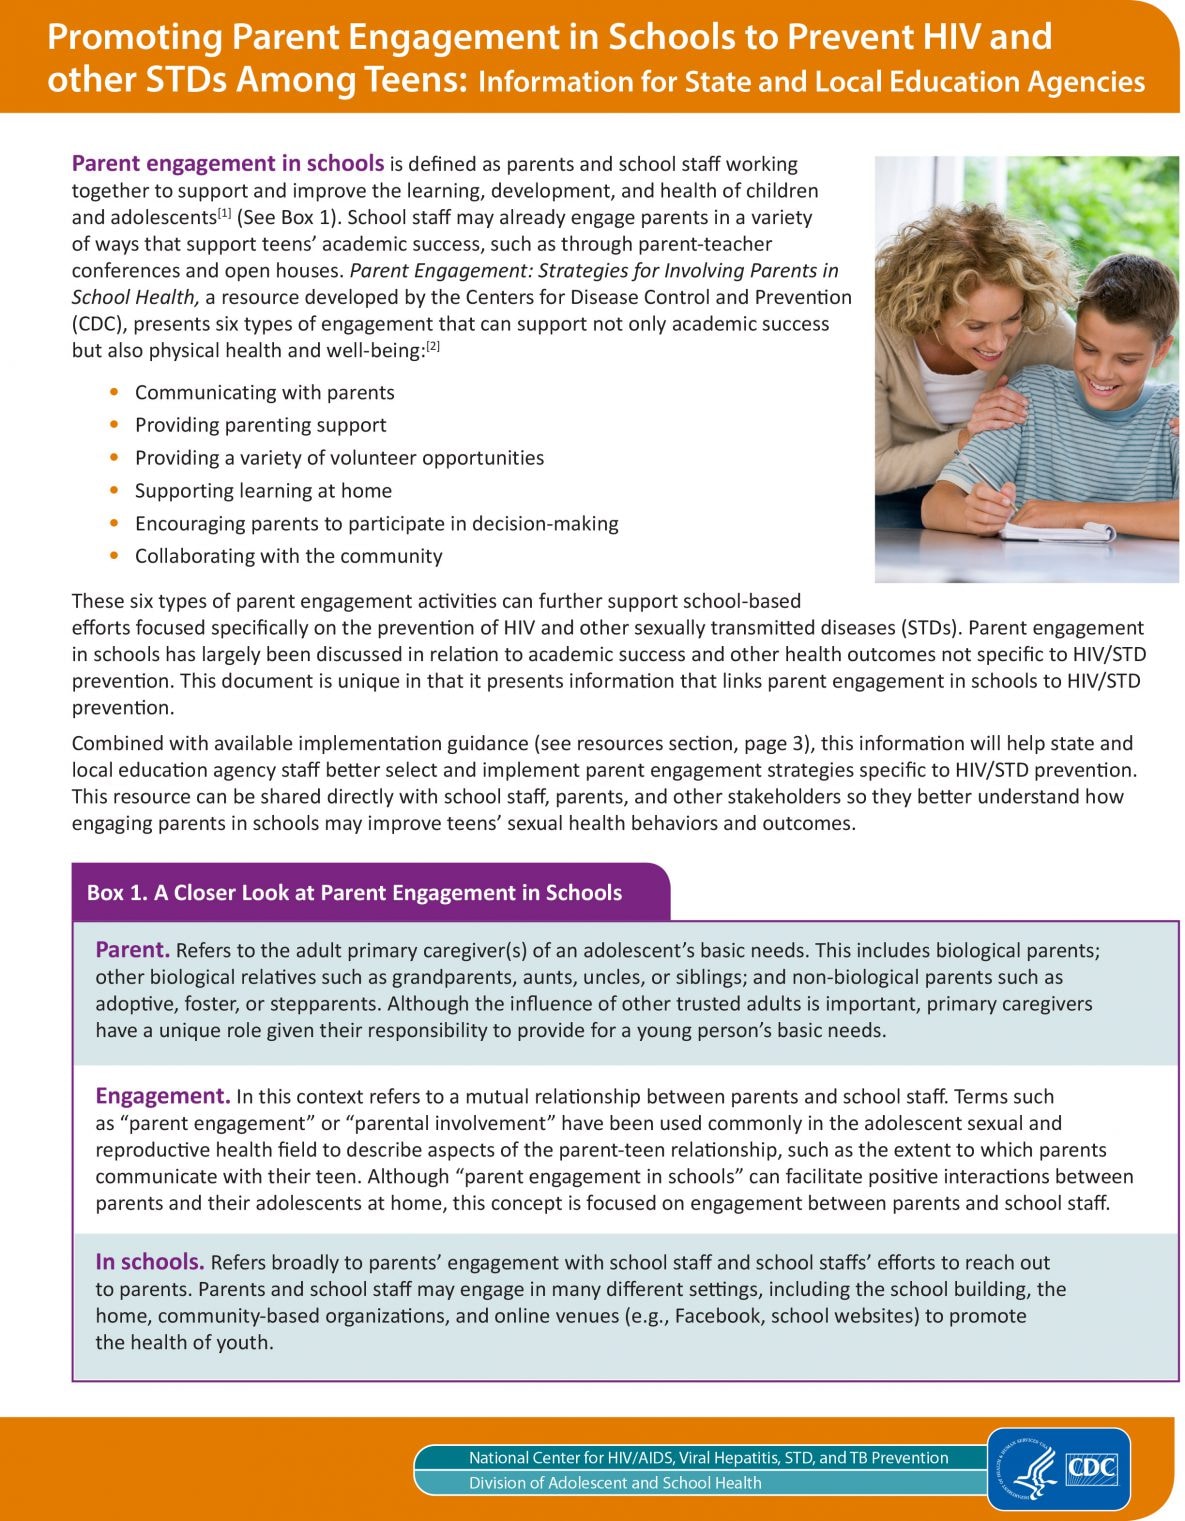 Empowering Parents: Valuable Resources for Effective Parenting